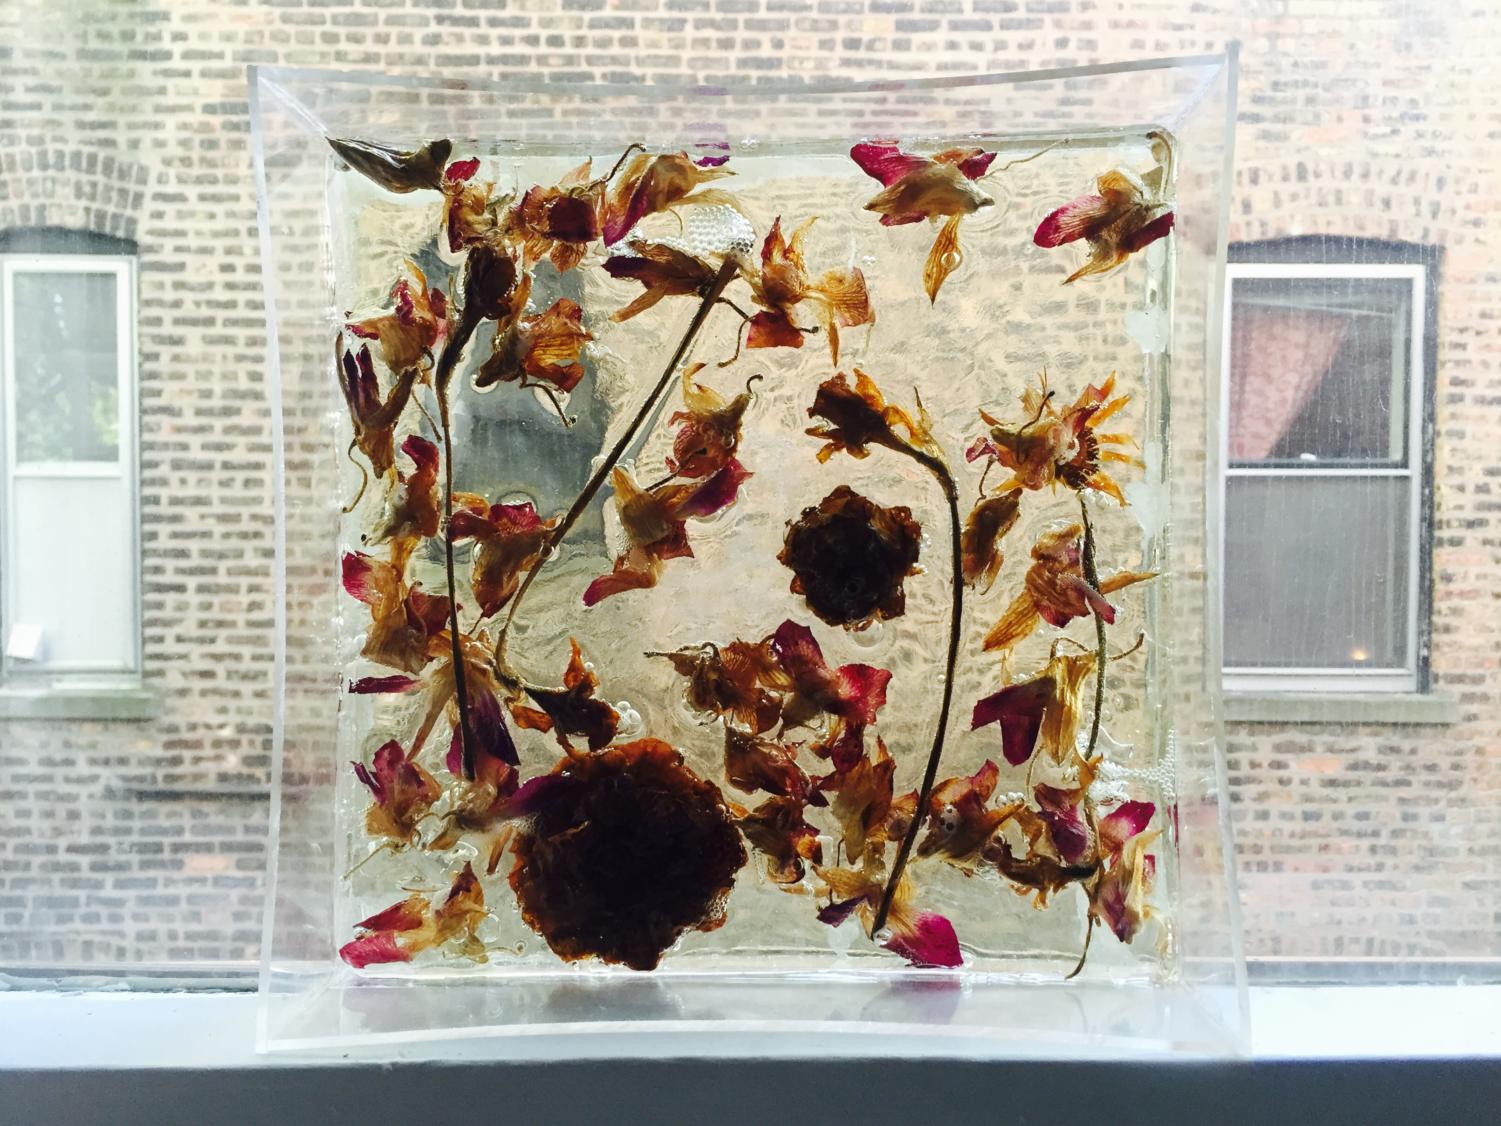 For a class project, Renata created a plexiglass crypt for flowers that represented relationships with people close to her.